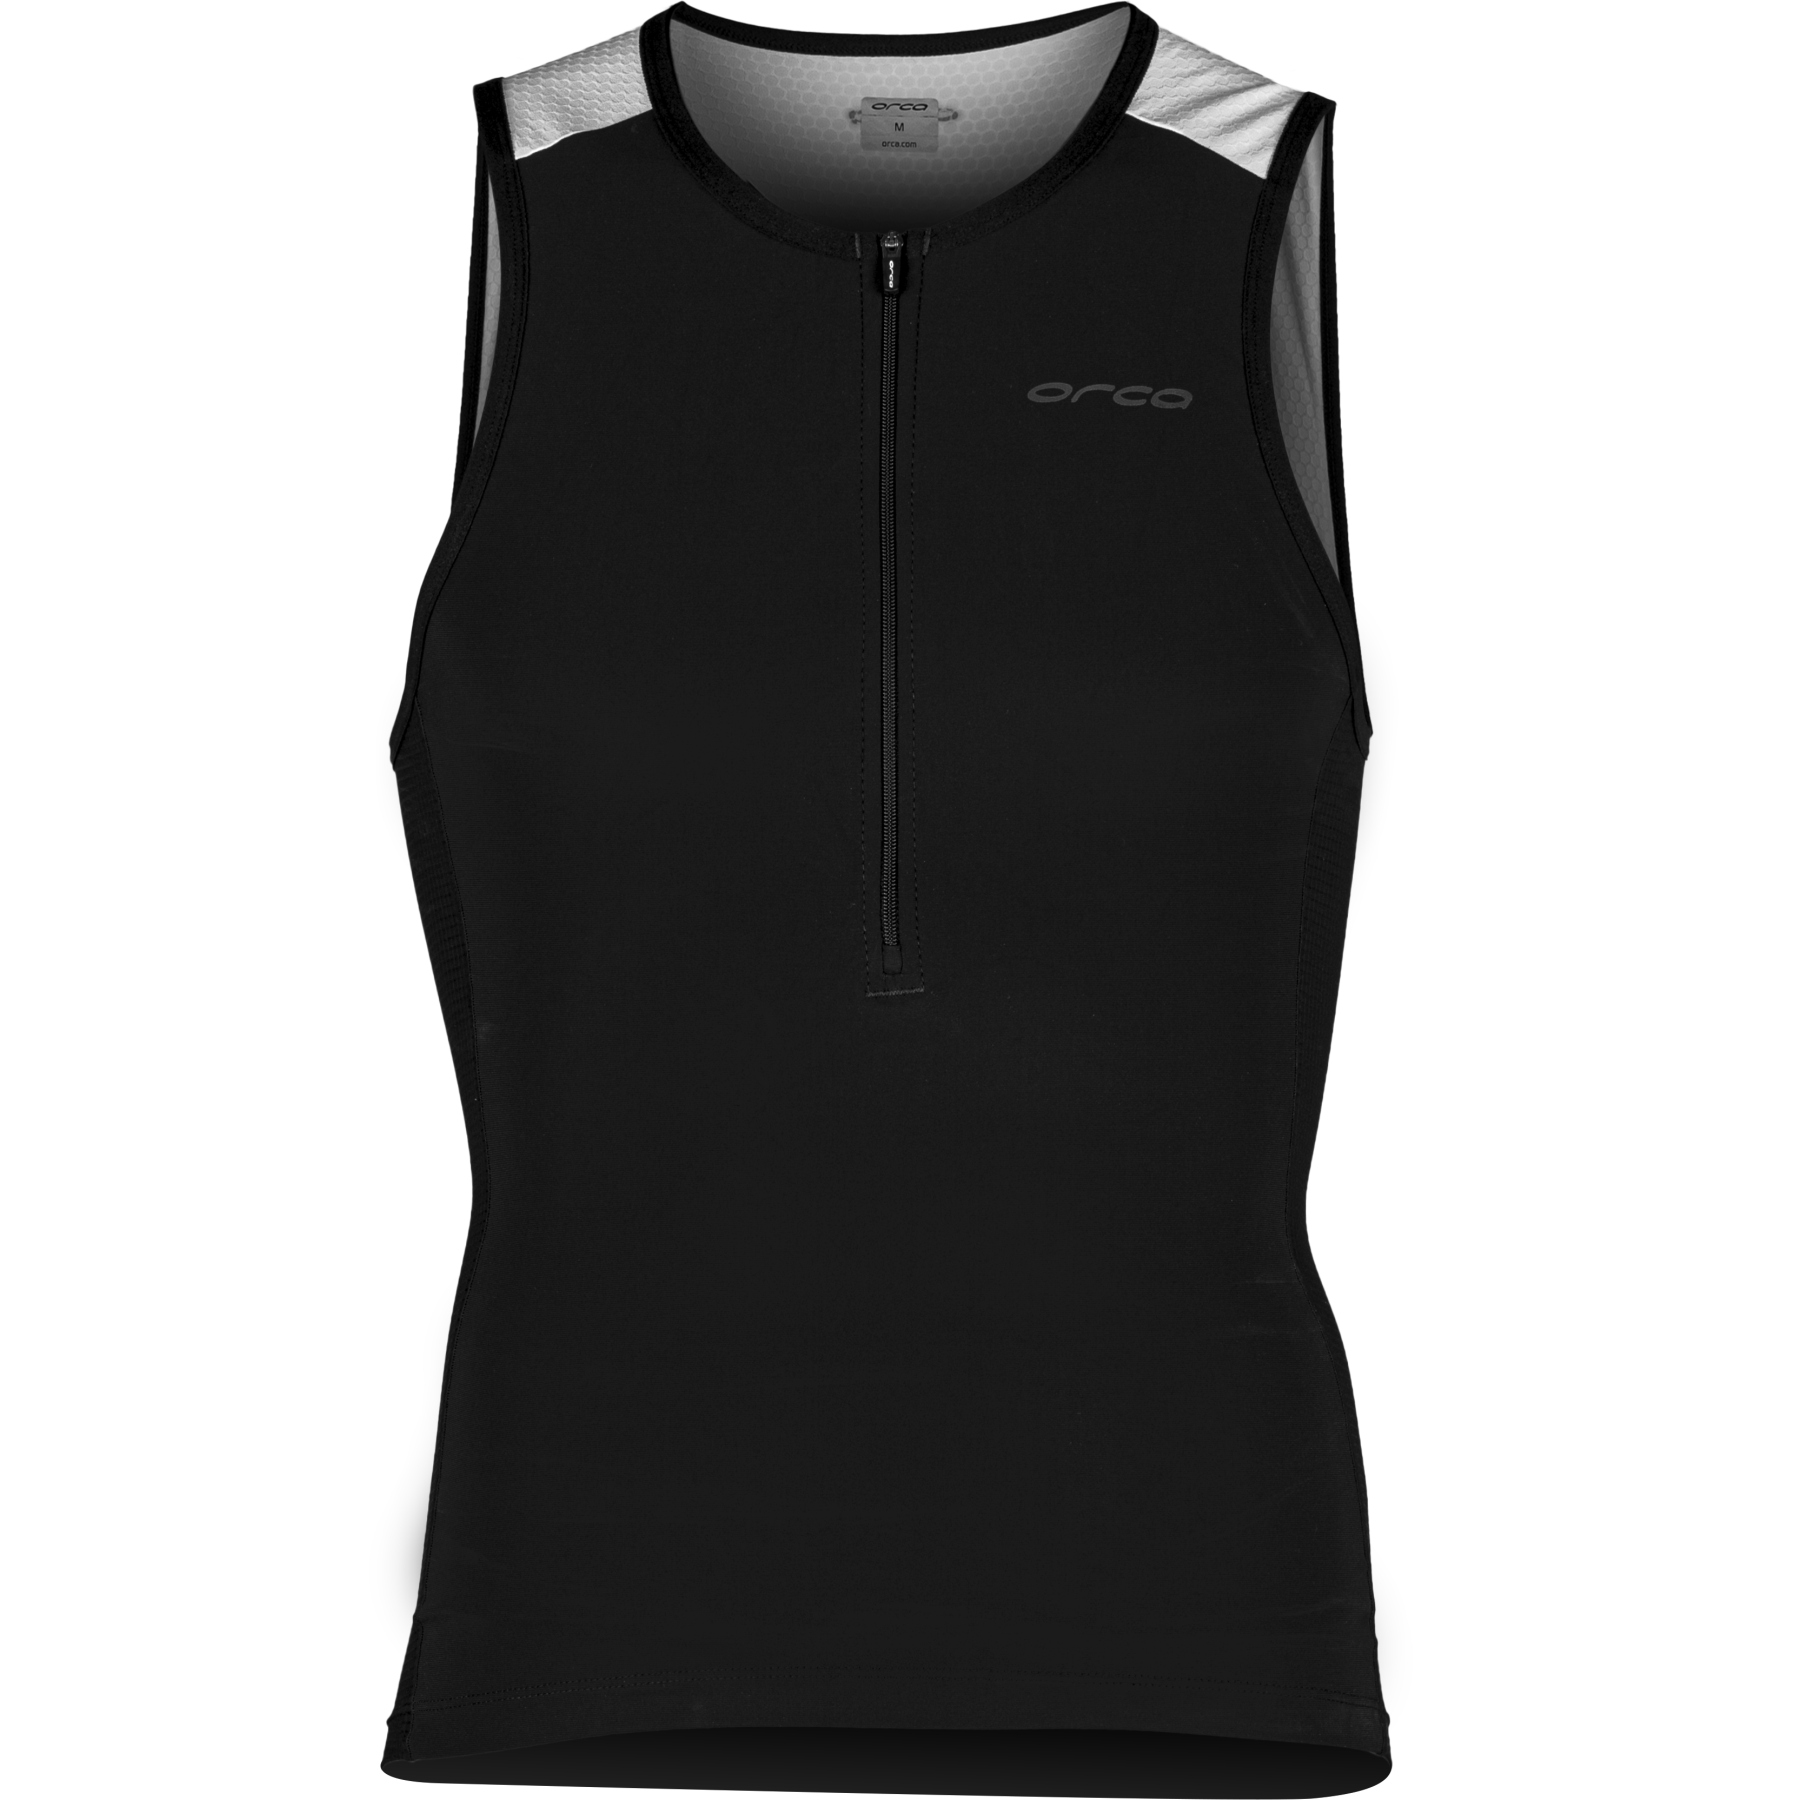 Picture of Orca Athlex Sleeveless Tri Top - white